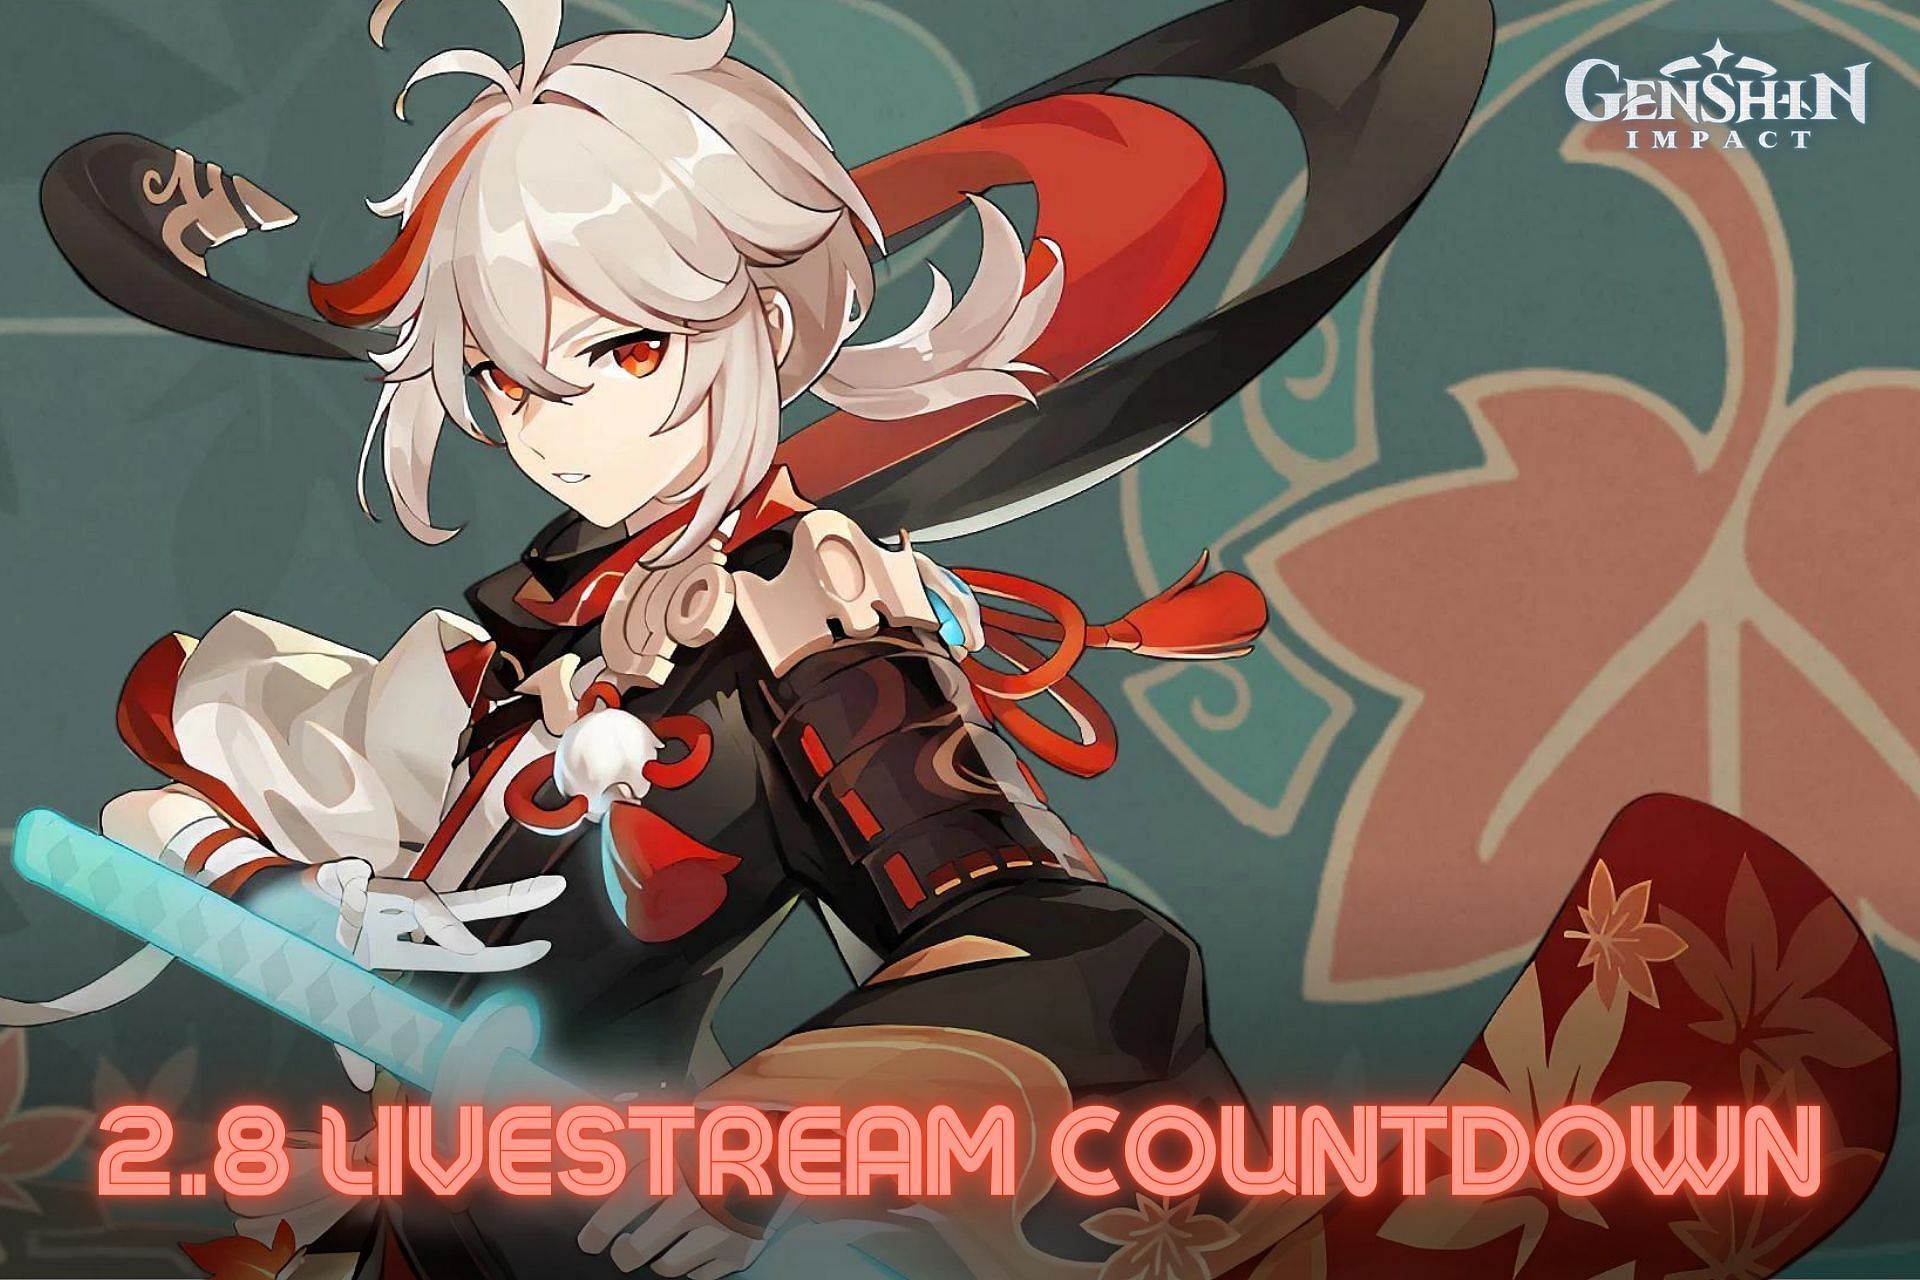 Version 2.8 livestream will start in less than 24 hours (Image via HoYoverse)